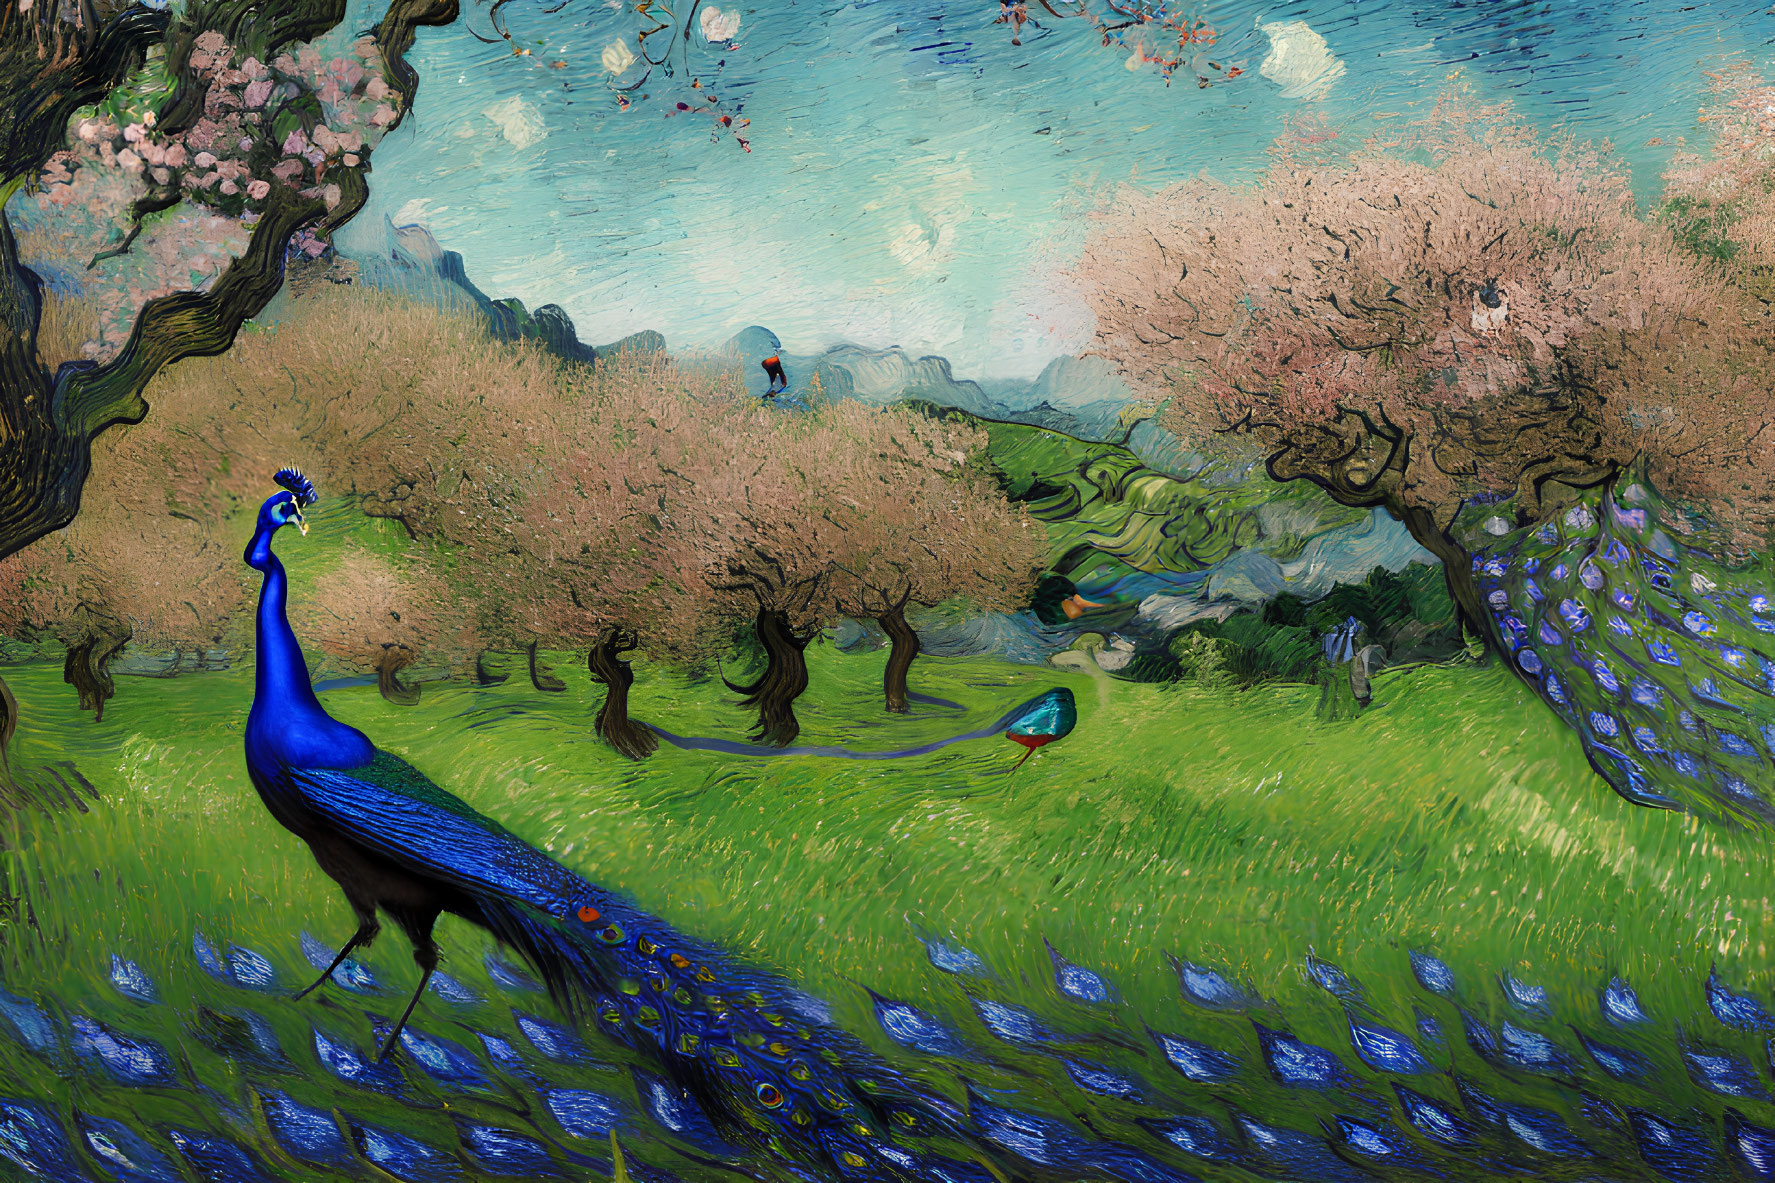 Colorful peacock in Van Gogh-style pastoral landscape with cherry trees.